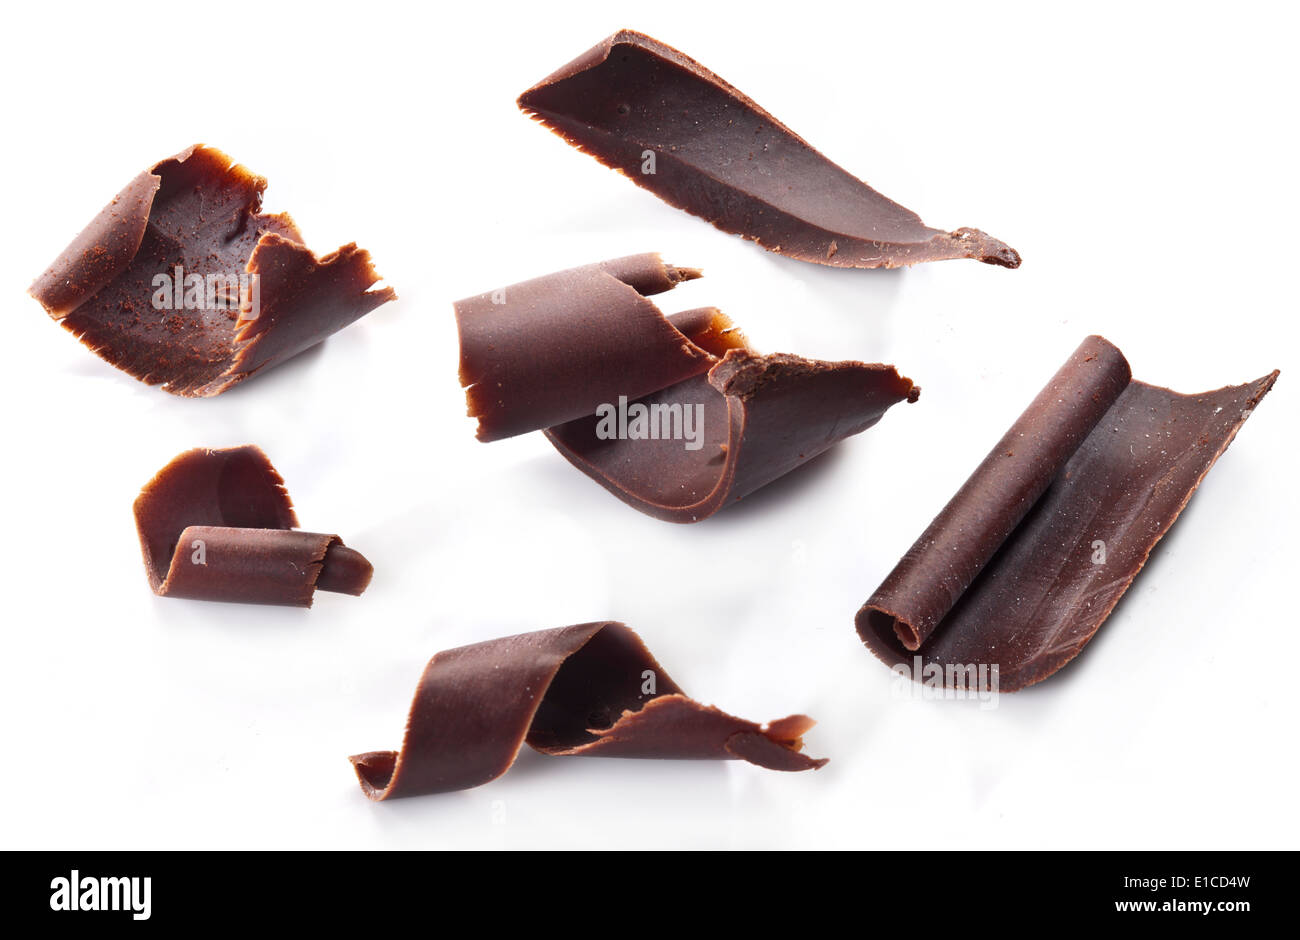 Chocolate chips isolated on a white background. Stock Photo